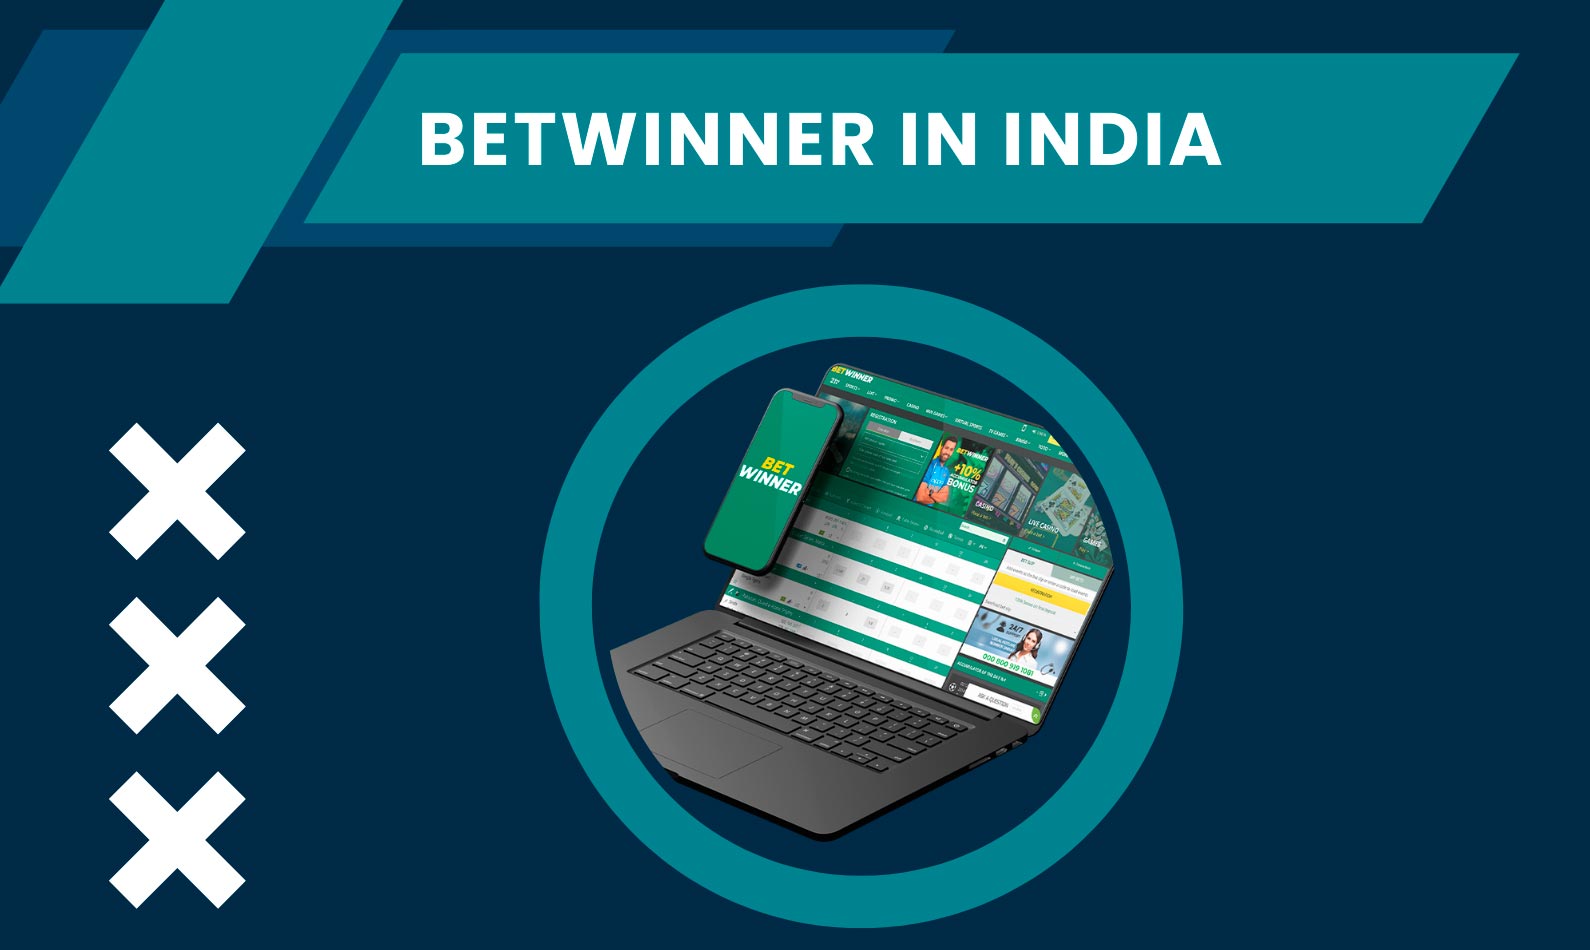 15 No Cost Ways To Get More With Betwinner app